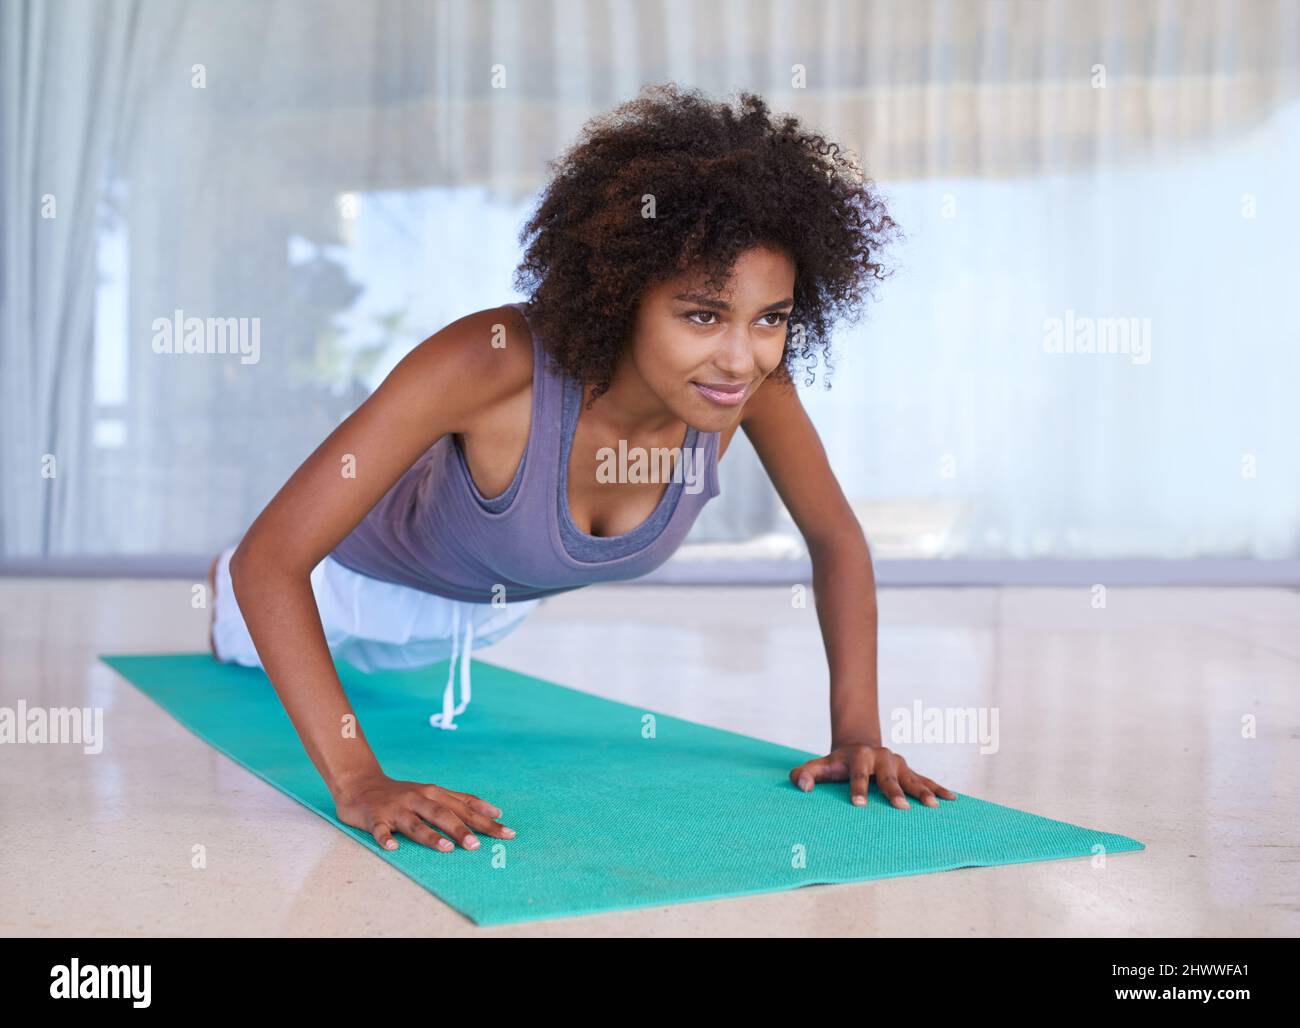 Working on her upper body. Shot of an attractive young woman doing push-ups on an exercise mat. Stock Photo